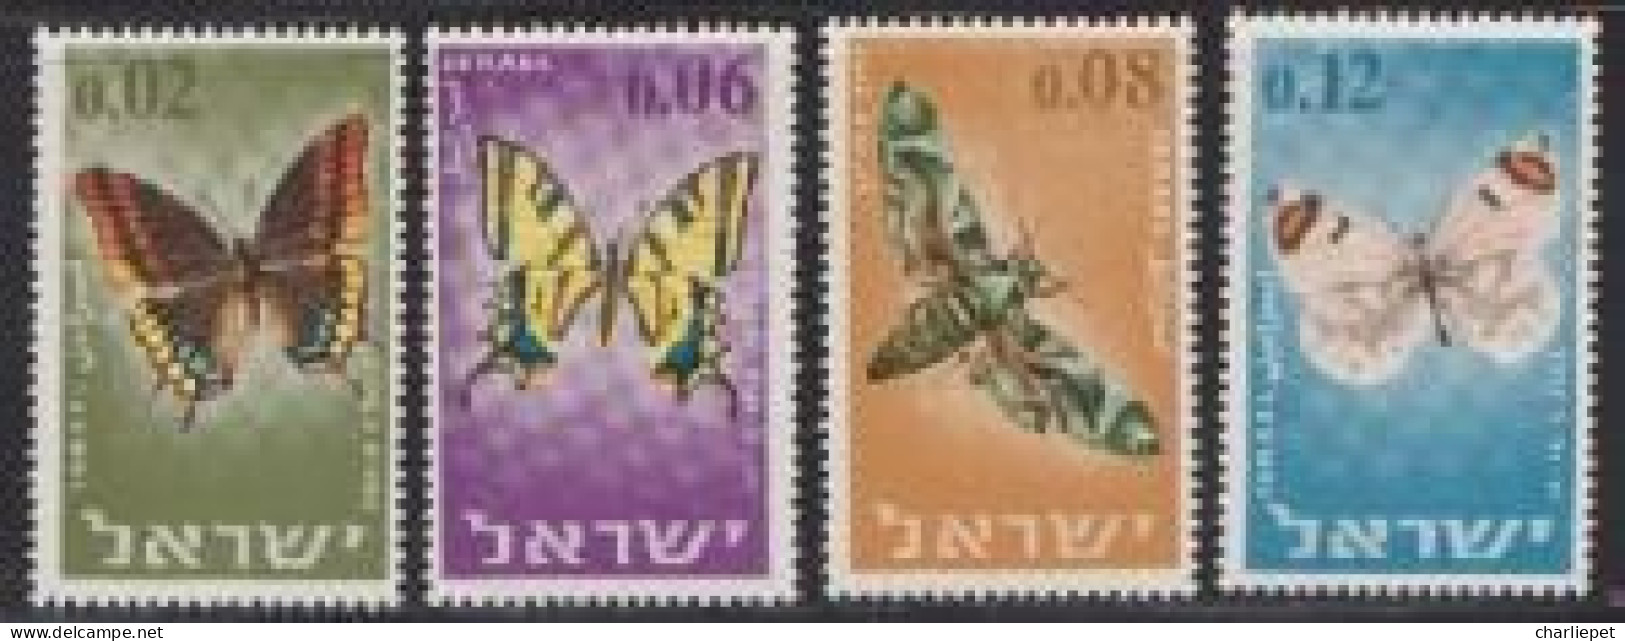 Israel Scott #  304-307  MNH VF Butterflies - Unused Stamps (without Tabs)